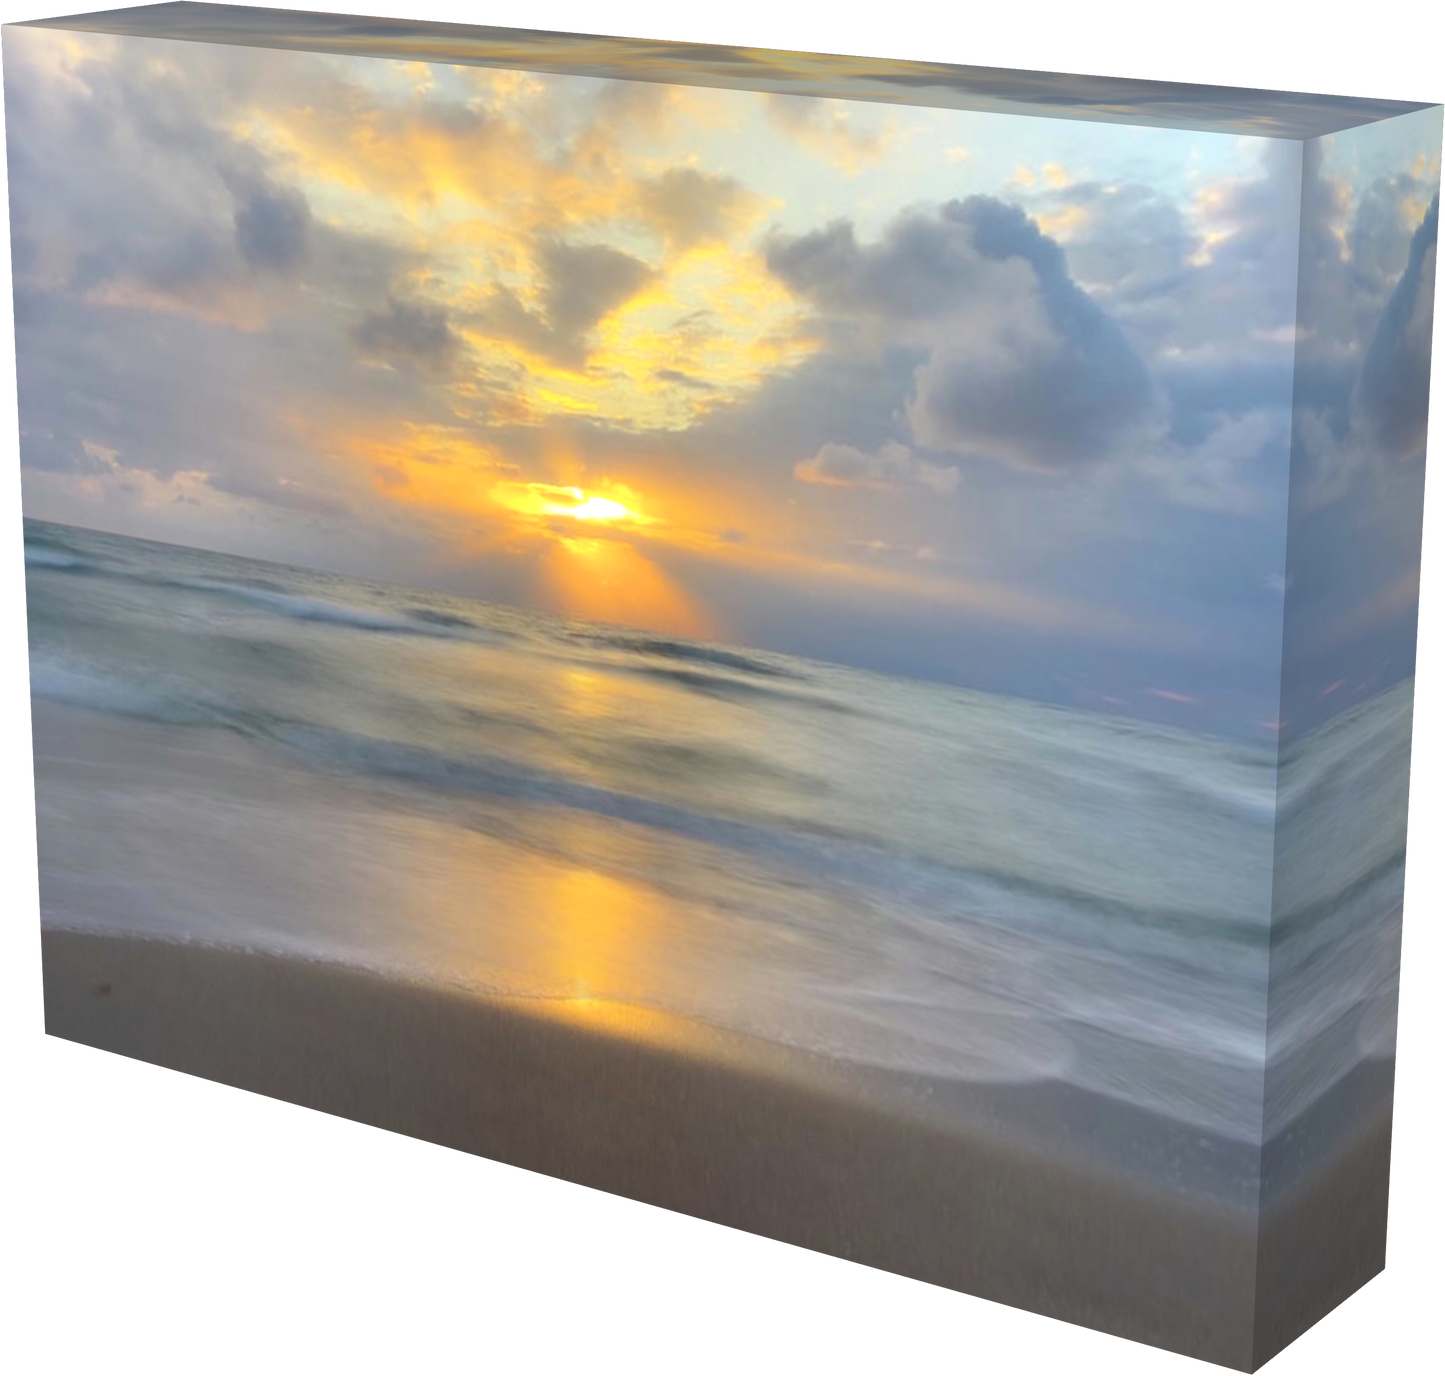 Reflections Of A Sunrise  - Classic Canvas Print